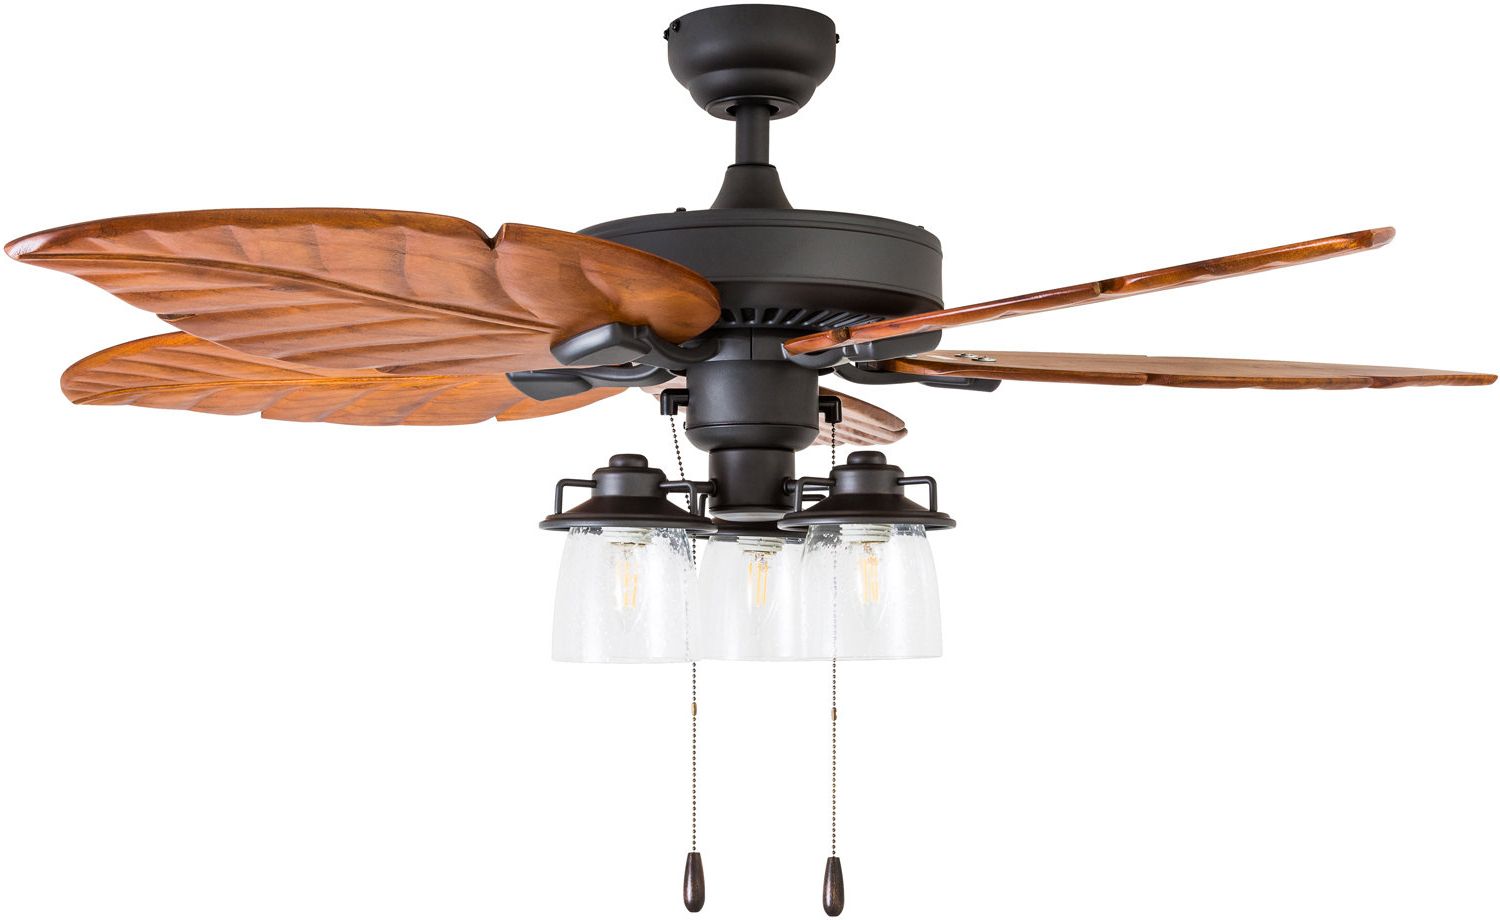 2020 52" Columbus 5 Blade Led Ceiling Fan With Regard To Kalista 5 Blade Ceiling Fans (View 17 of 20)